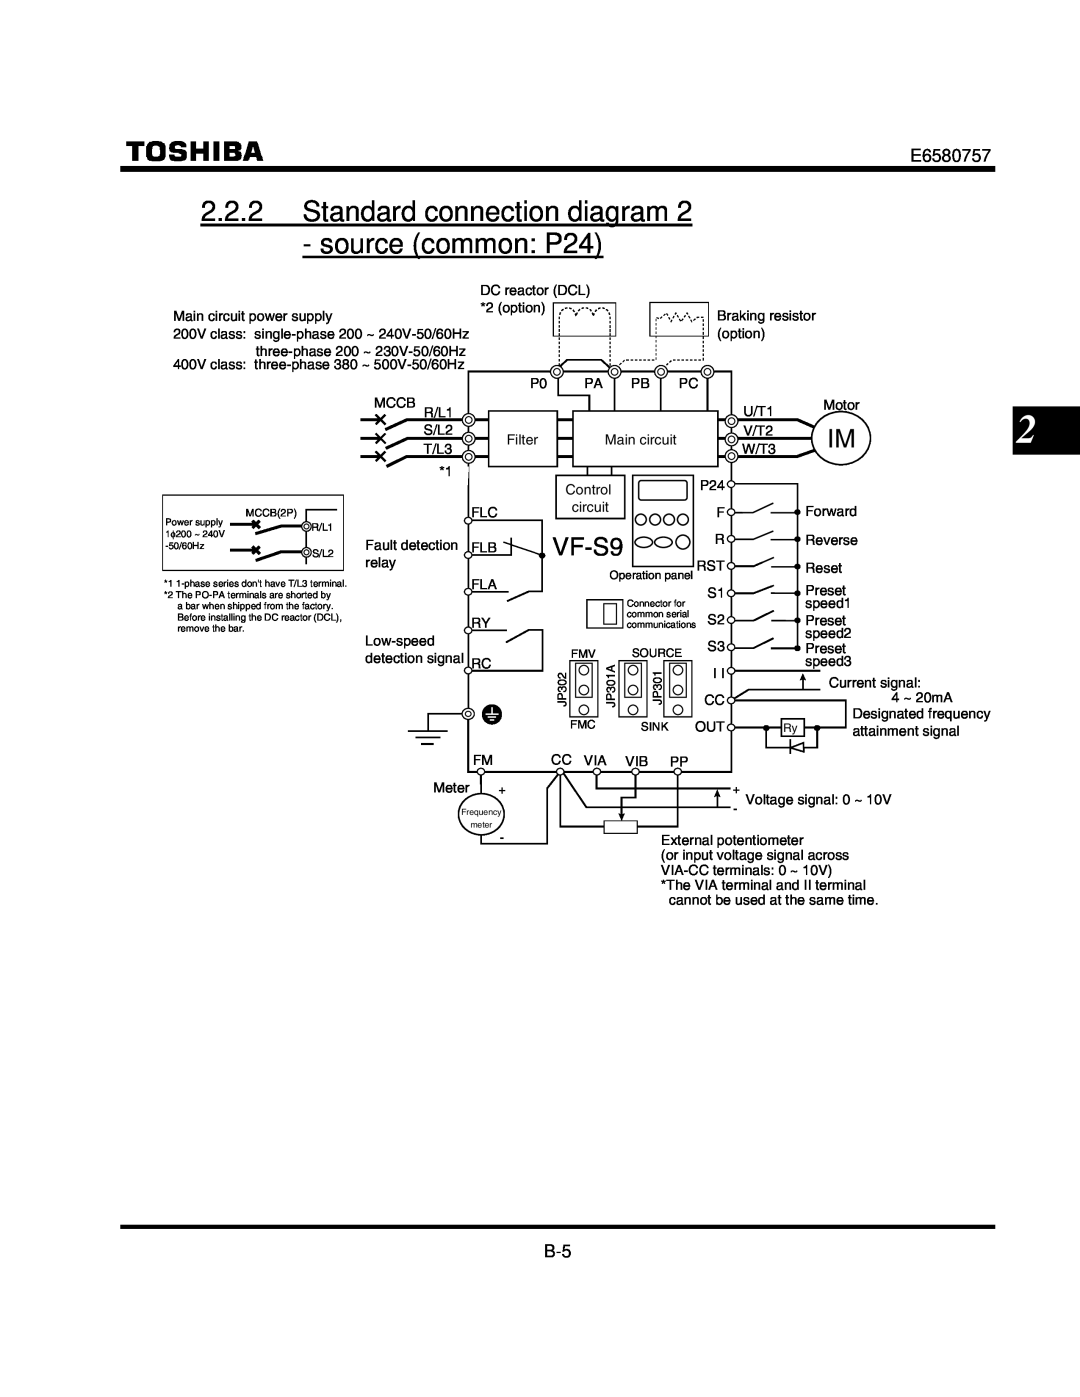 Toshiba VF-S9 manual Standard connection diagram 2 - source common P24, communications, JP302, JP301, Frequency, meter 